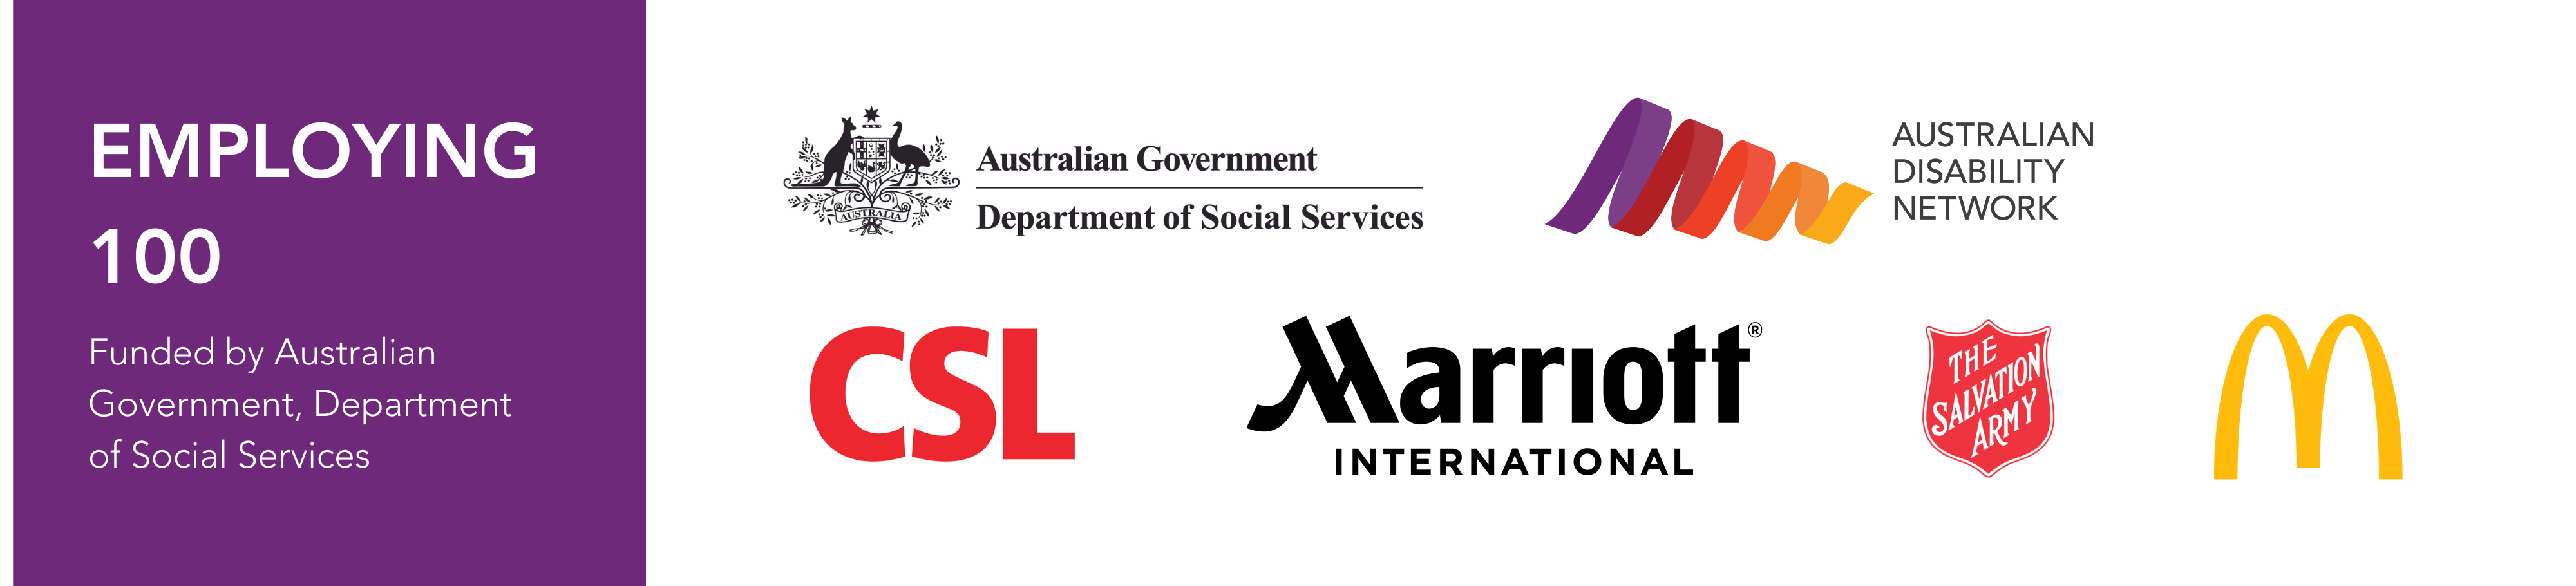 The logos of Australian Disability Network and the Employing 100 Employer Partners, which include McDonalds, Marriot International, CSL Limited, the Salvation Army and Australian, Government, Department of Social Service, which has funded Employing 100.